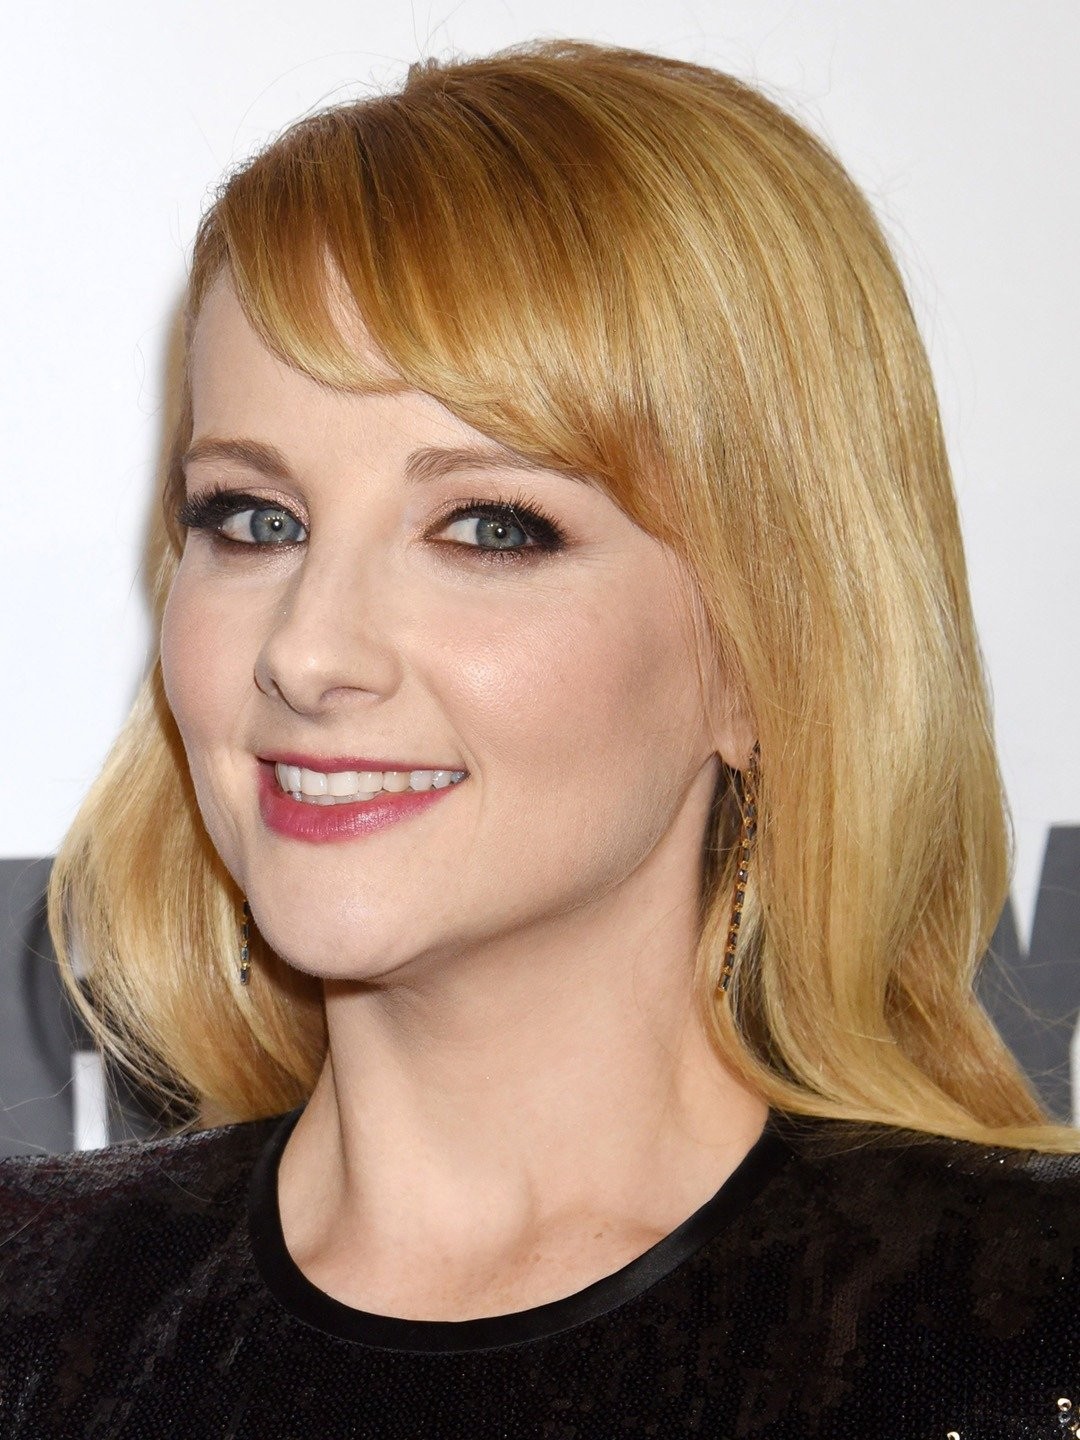 angelica yape recommends Pictures Of Melissa Rauch